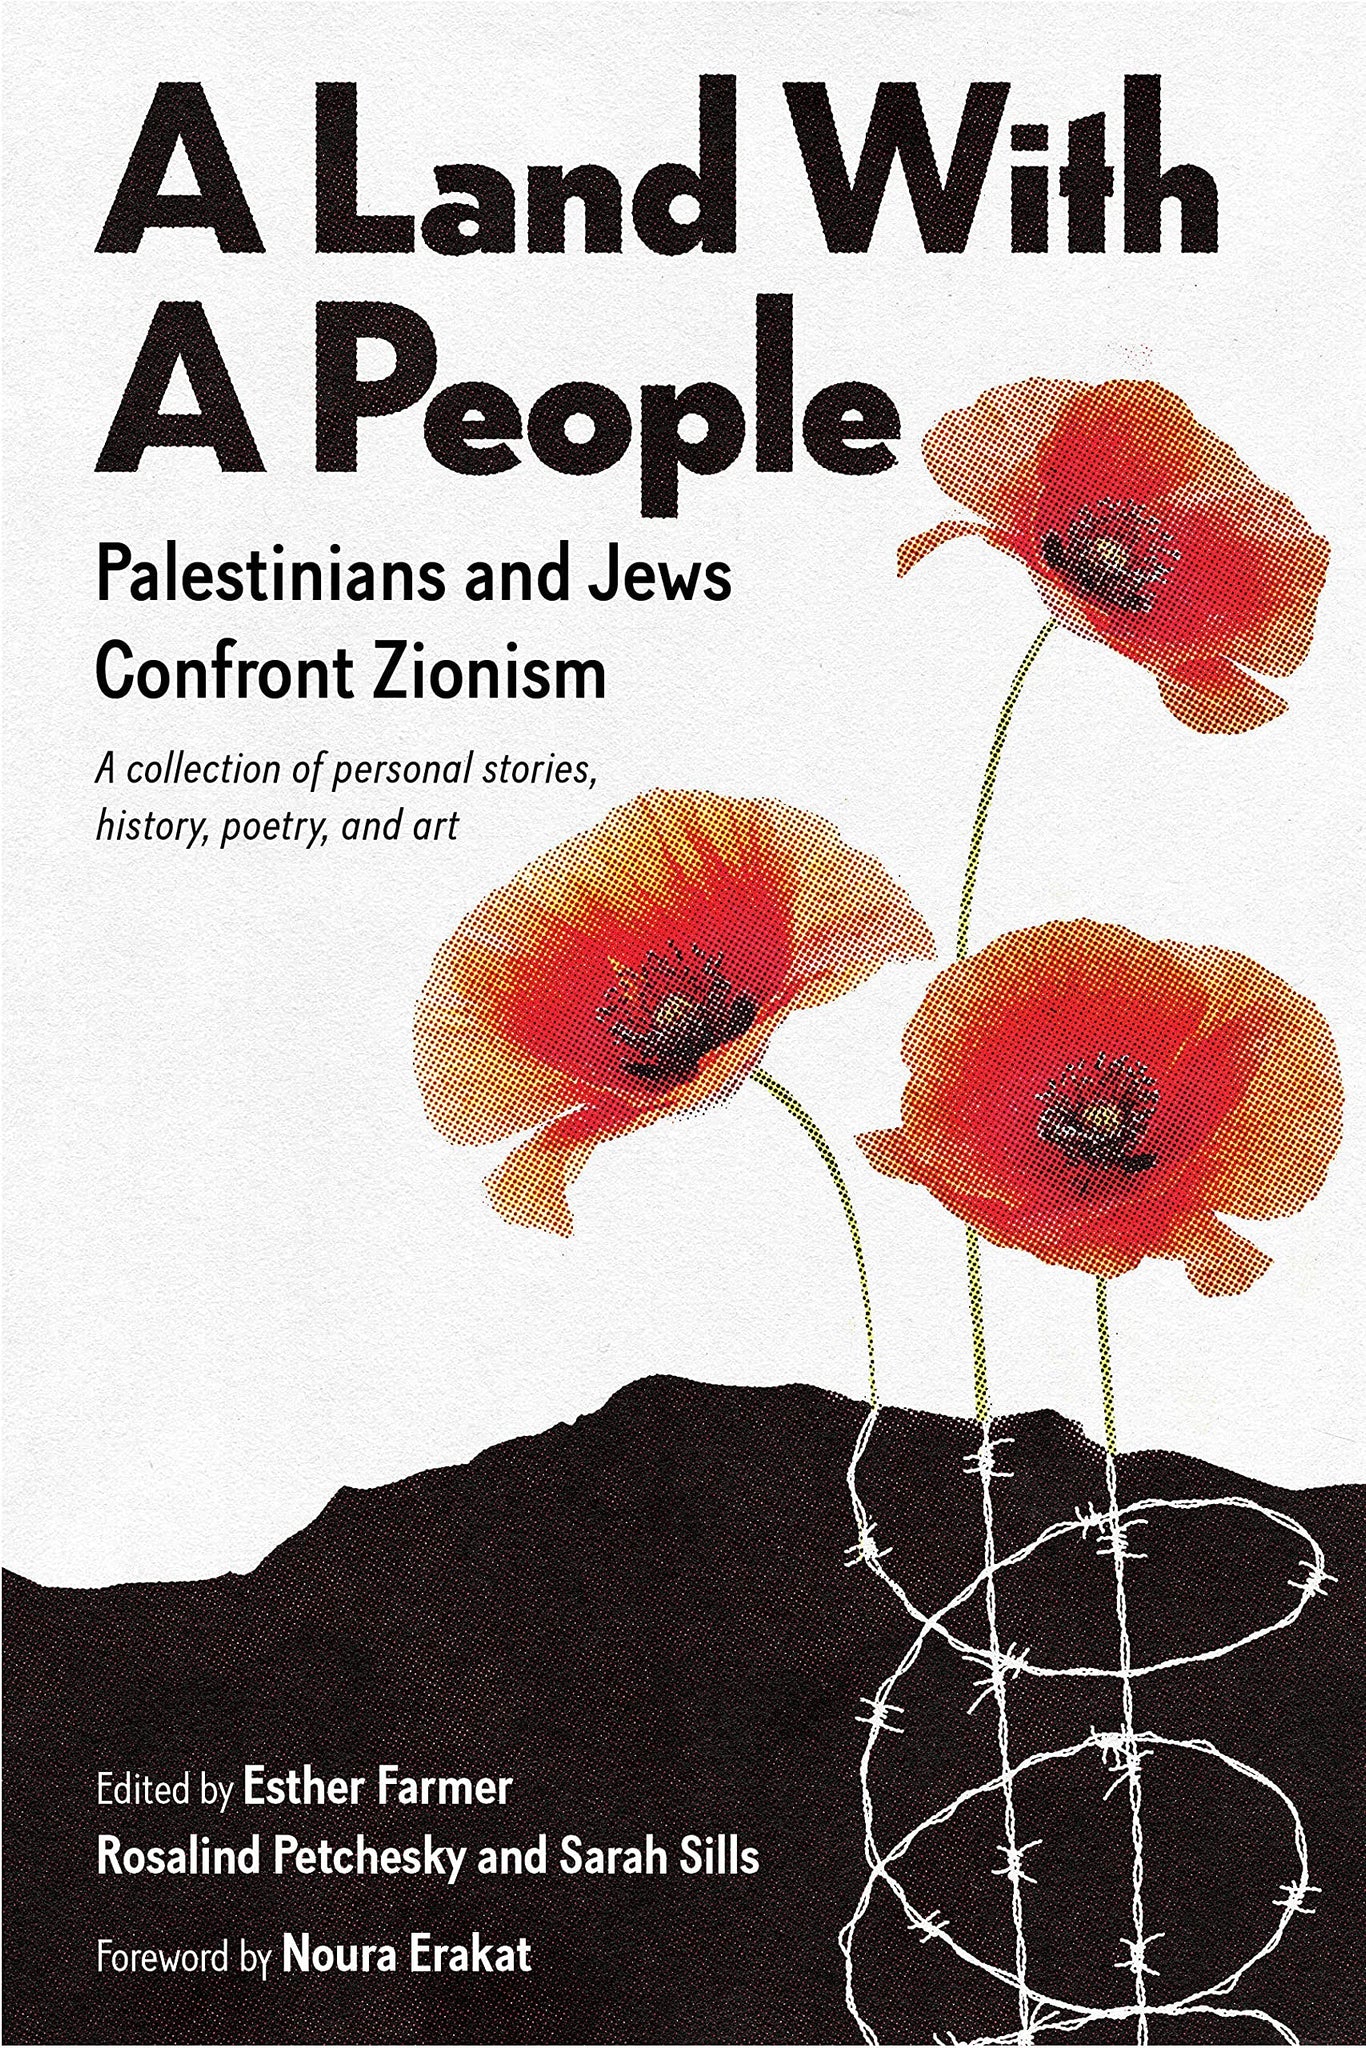 A Land with a People: Palestinians and Jews Confront Zionism (Paperback)